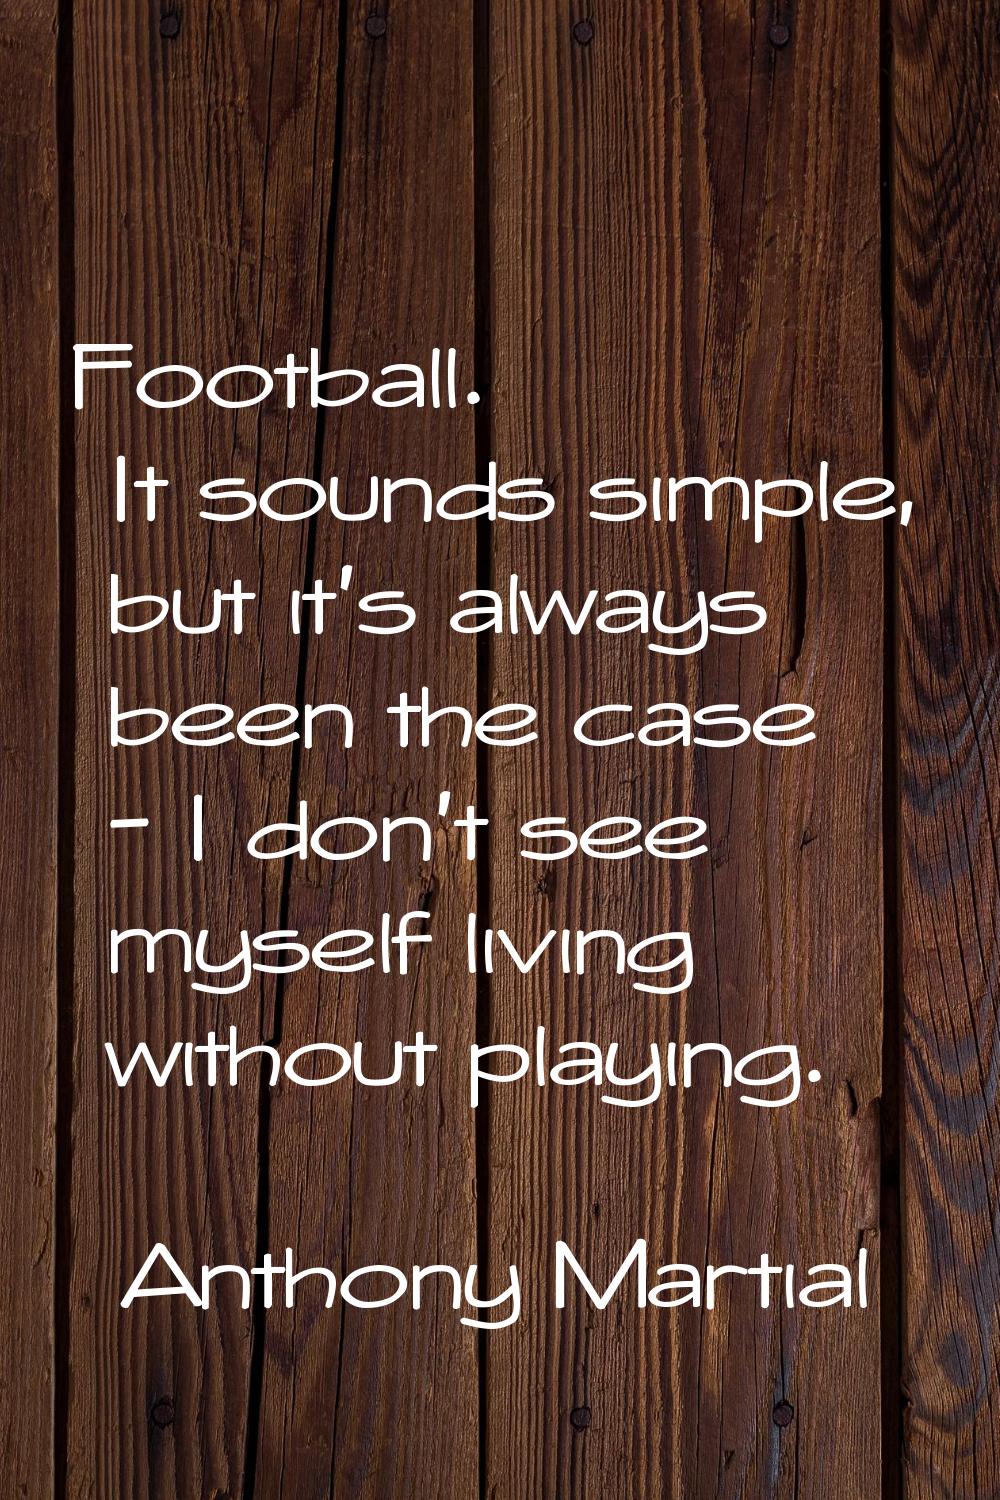 Football. It sounds simple, but it's always been the case - I don't see myself living without playi